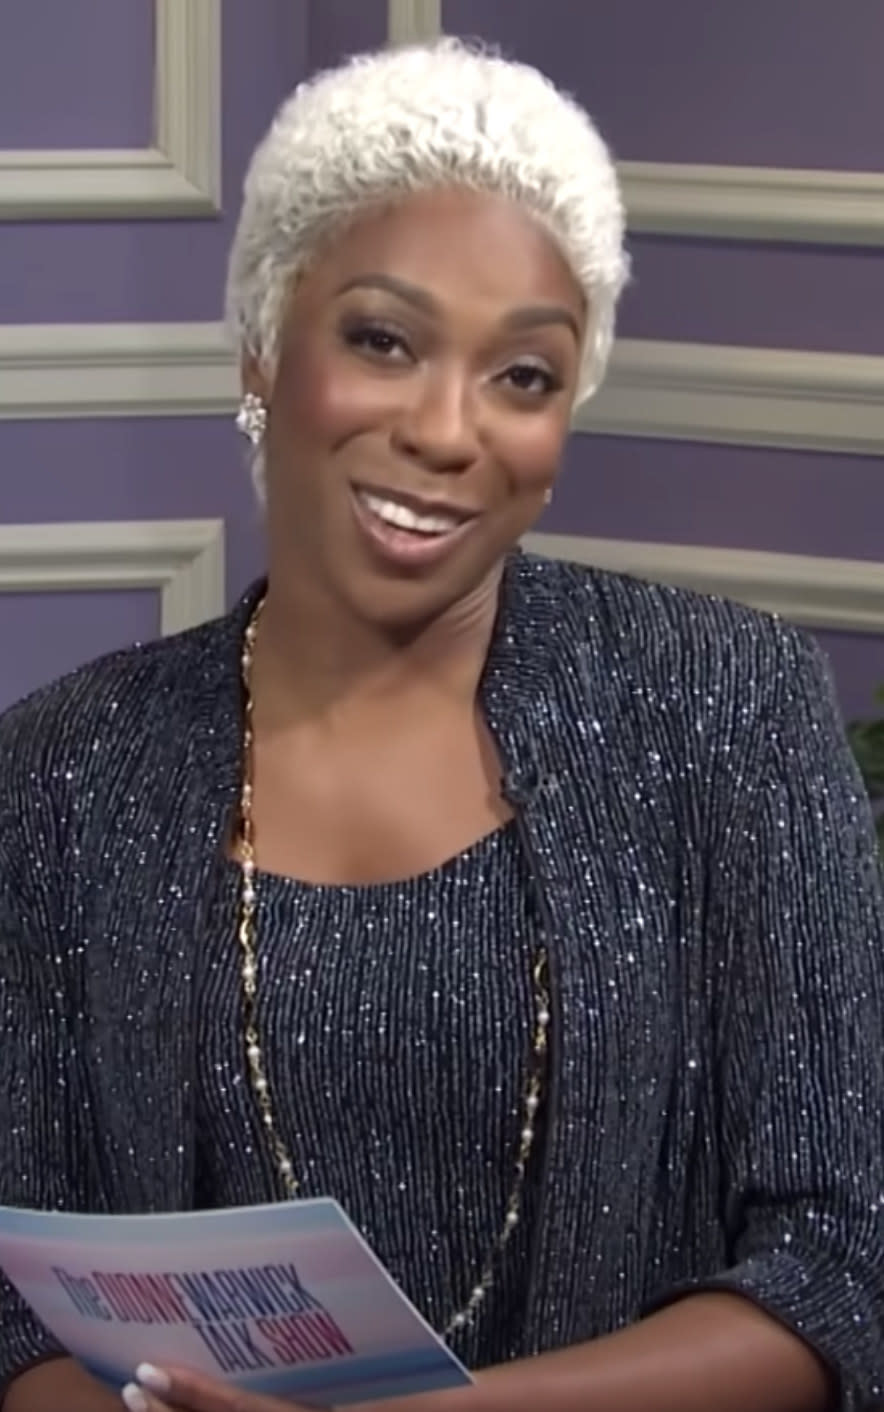 Nwodim wearing a grey wig and sequined suit